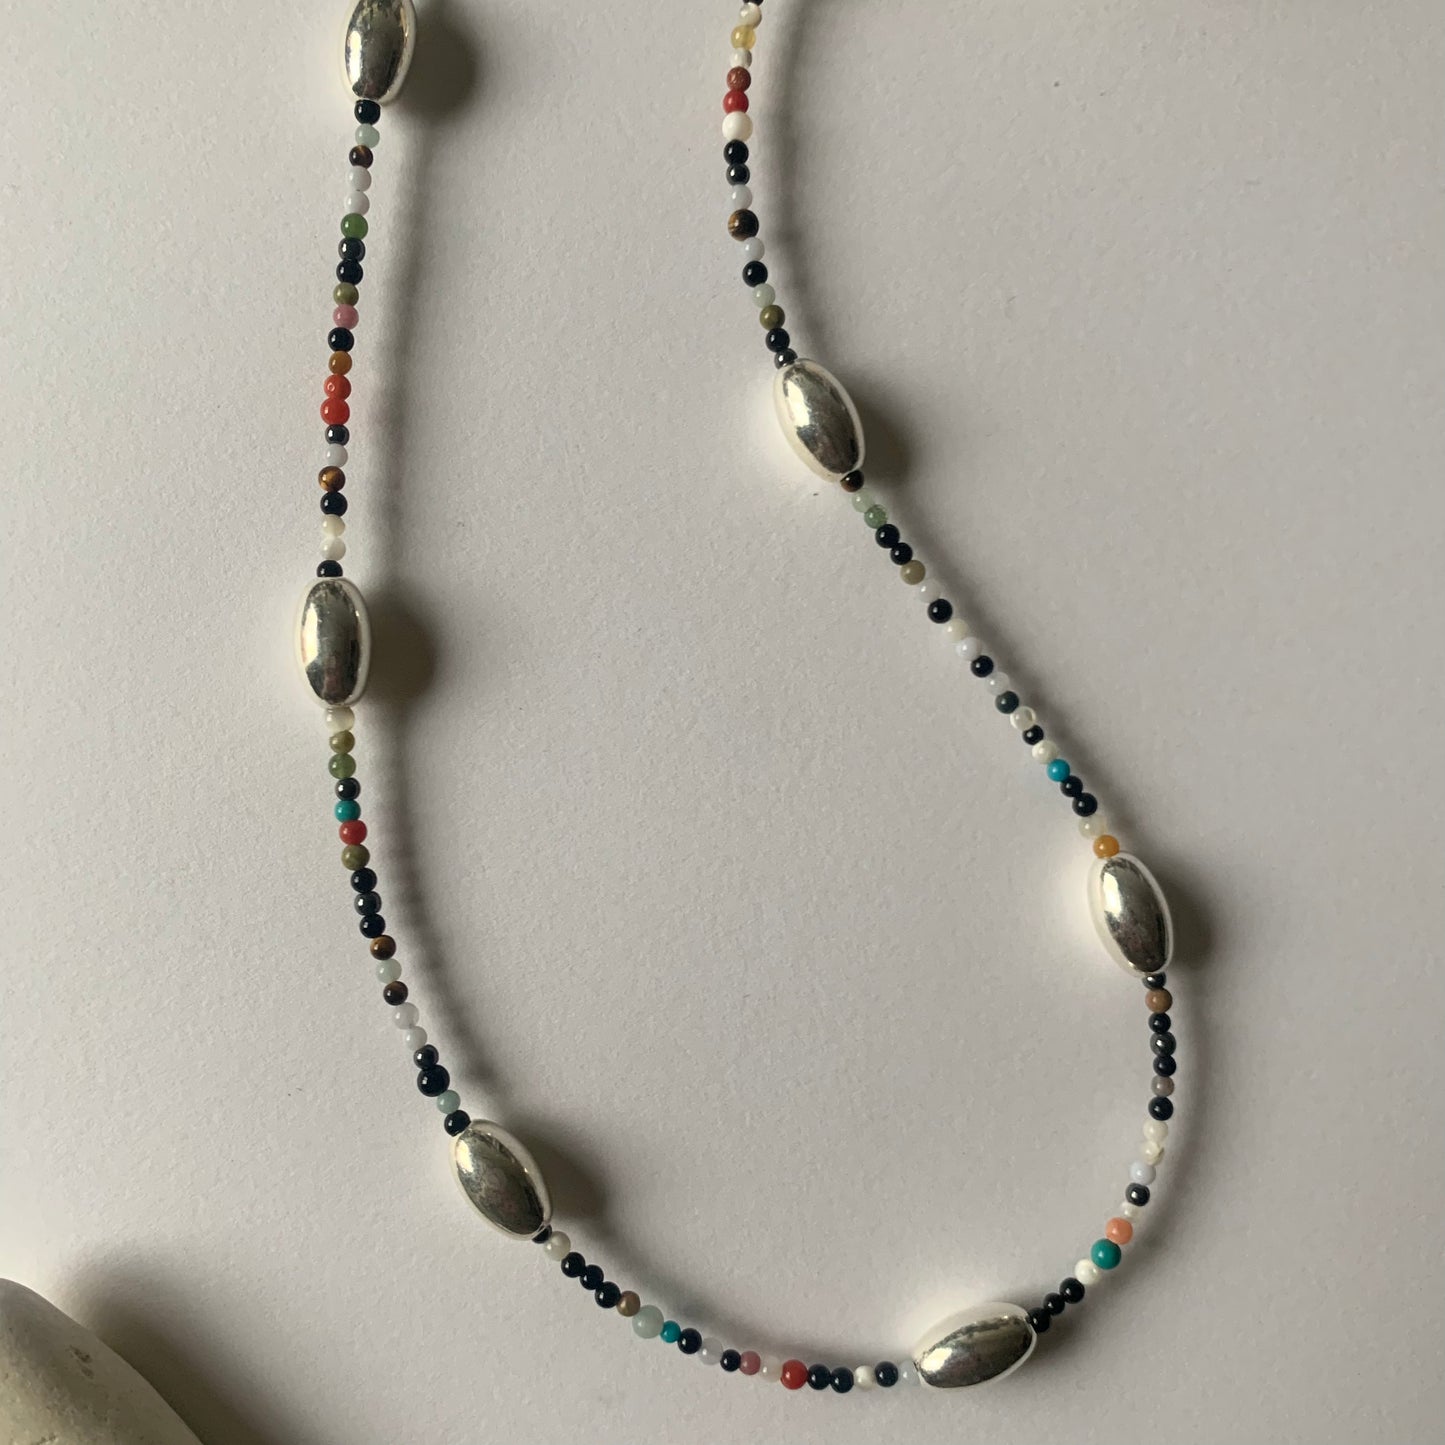 stone beads necklace